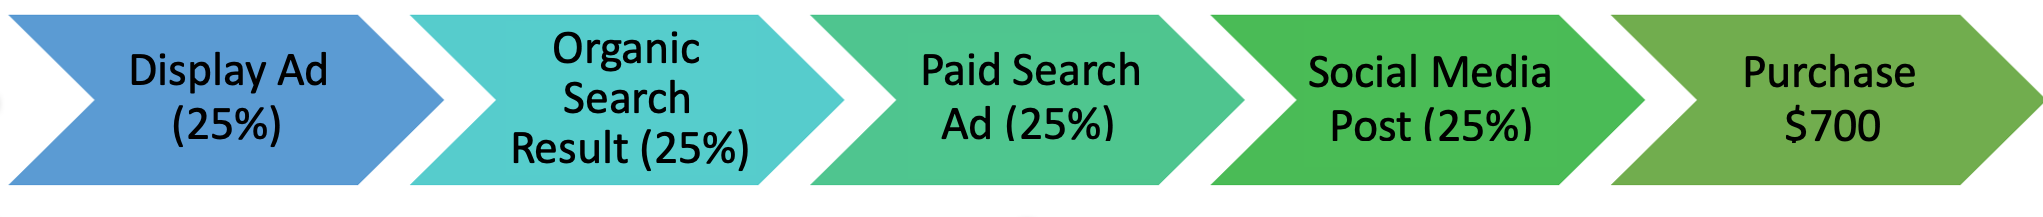 display ad 25%, organic search result 25%, paid search ad 25%, social media post 25%, purchase $700